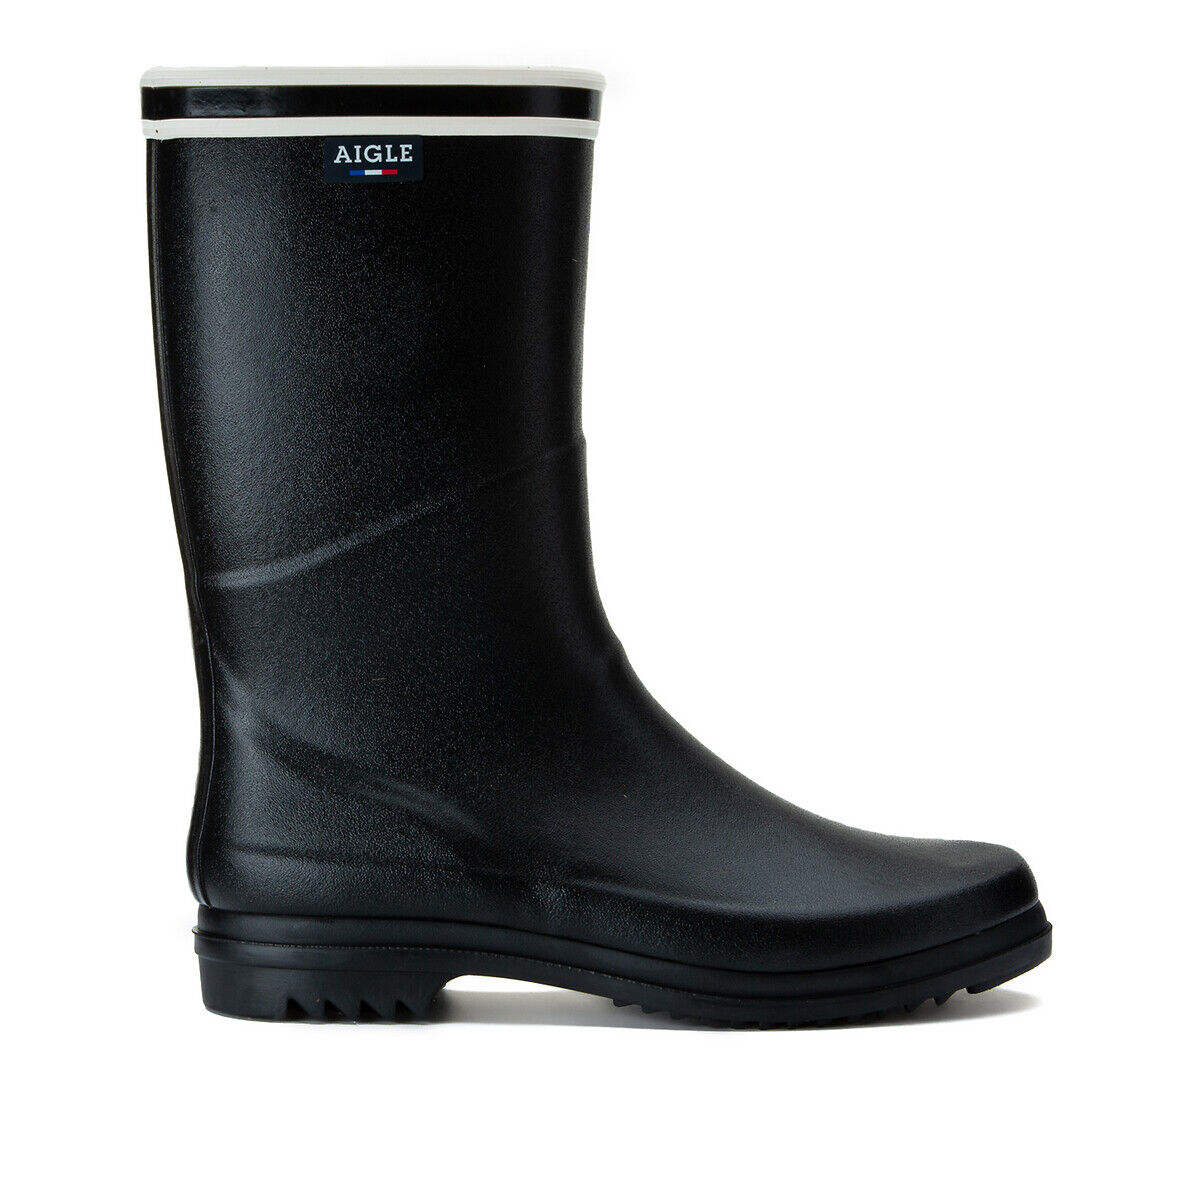 Aigle Galochas Chanteboot Stripes, Made in France   Preto